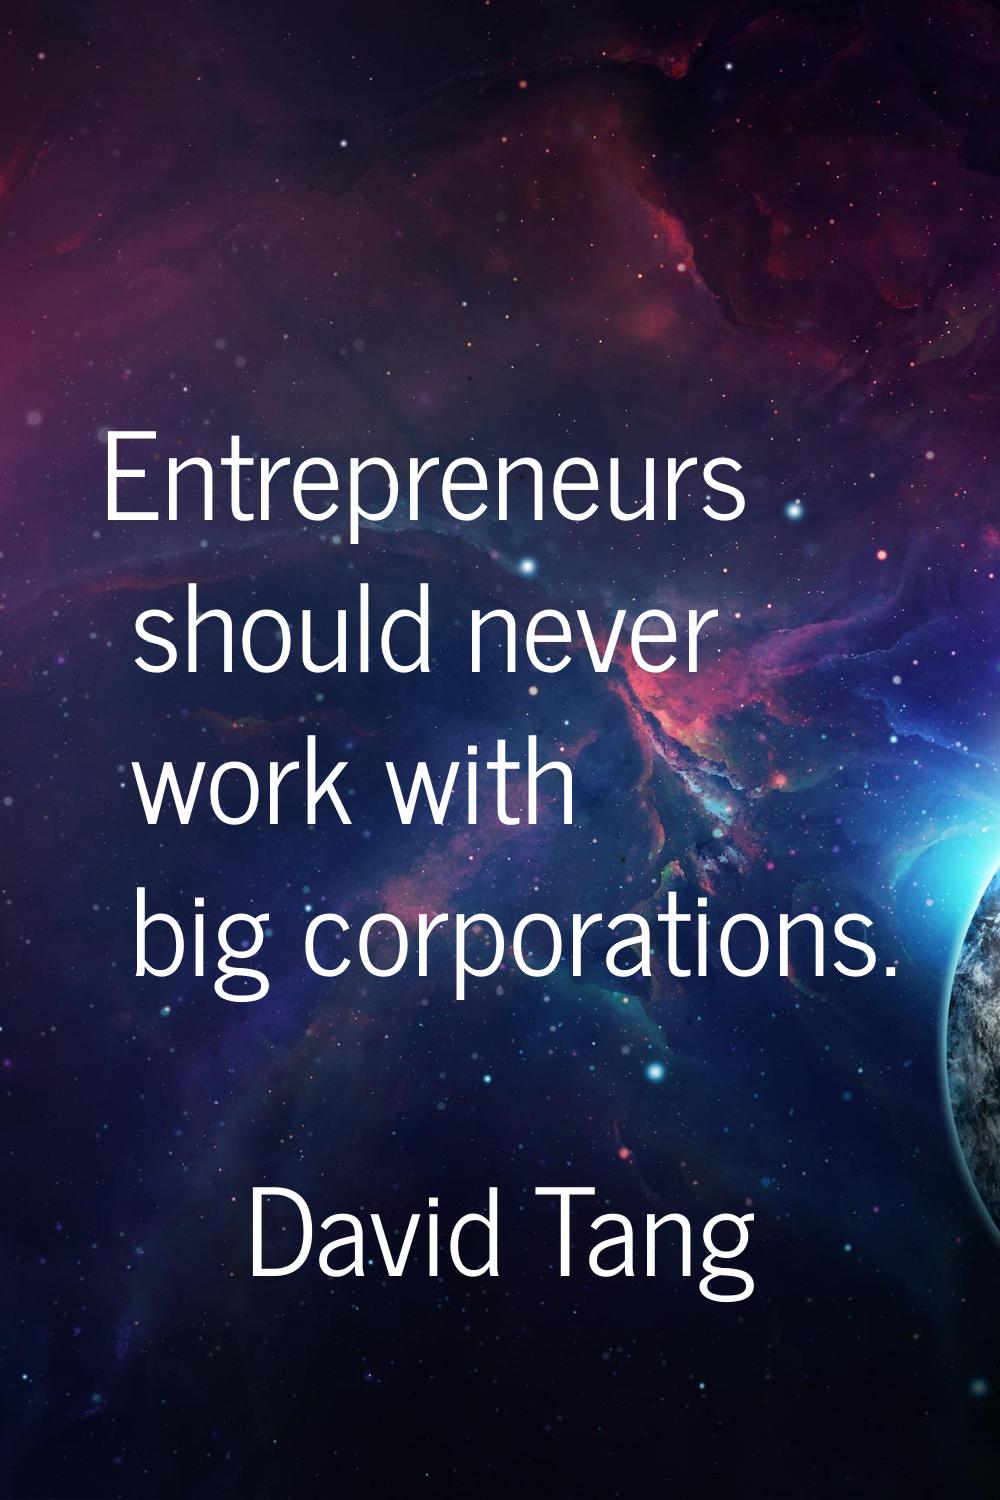 Entrepreneurs should never work with big corporations.